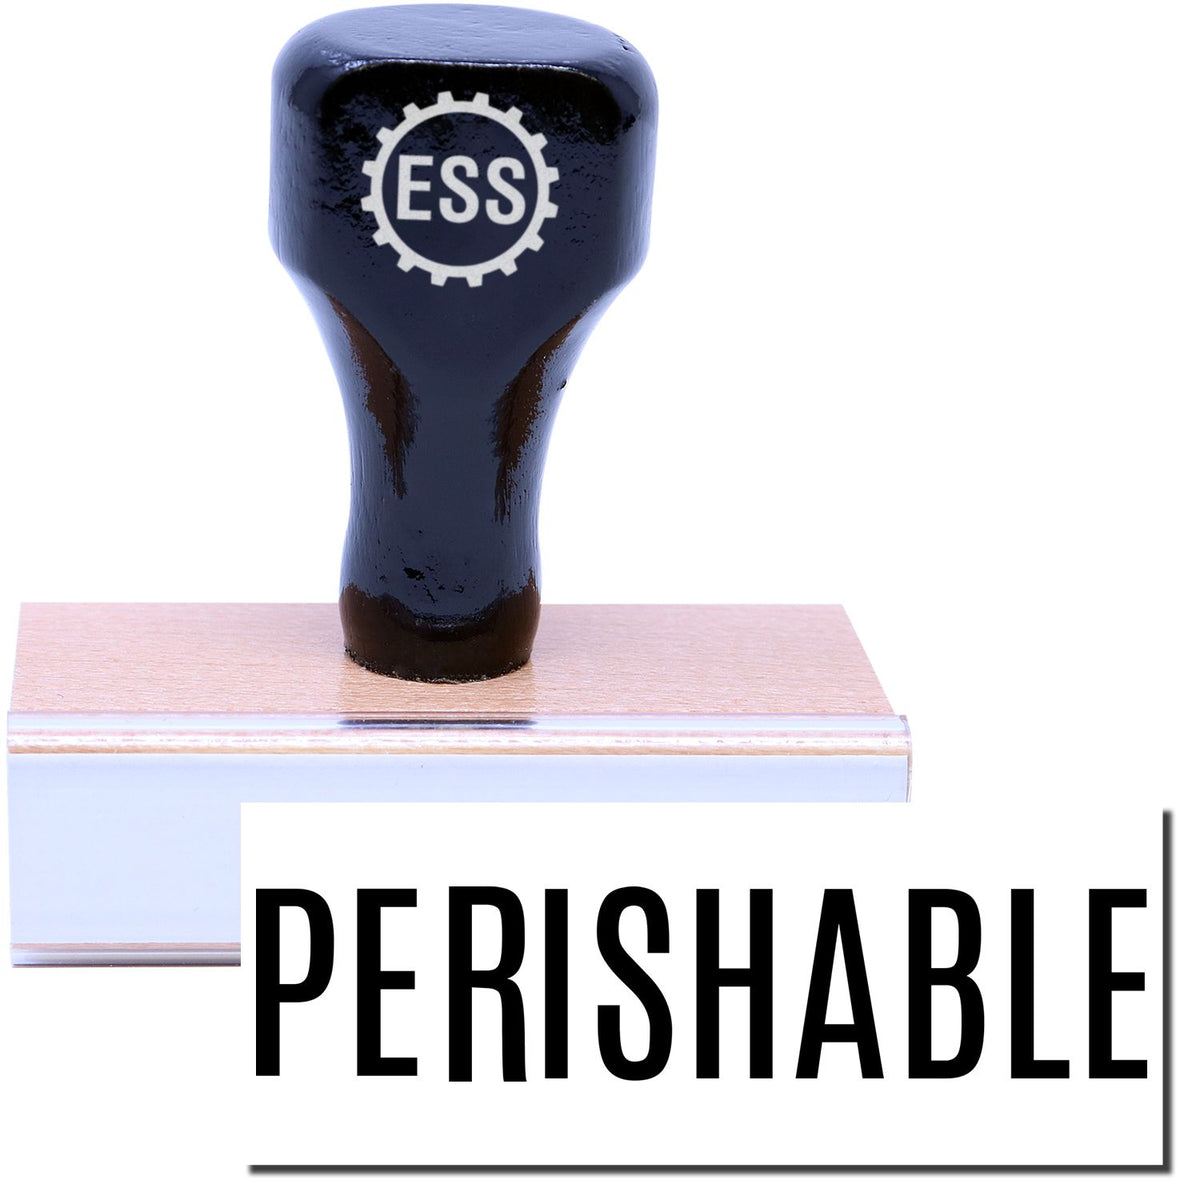 A stock office rubber stamp with a stamped image showing how the text &quot;PERISHABLE&quot; in a large font is displayed after stamping.